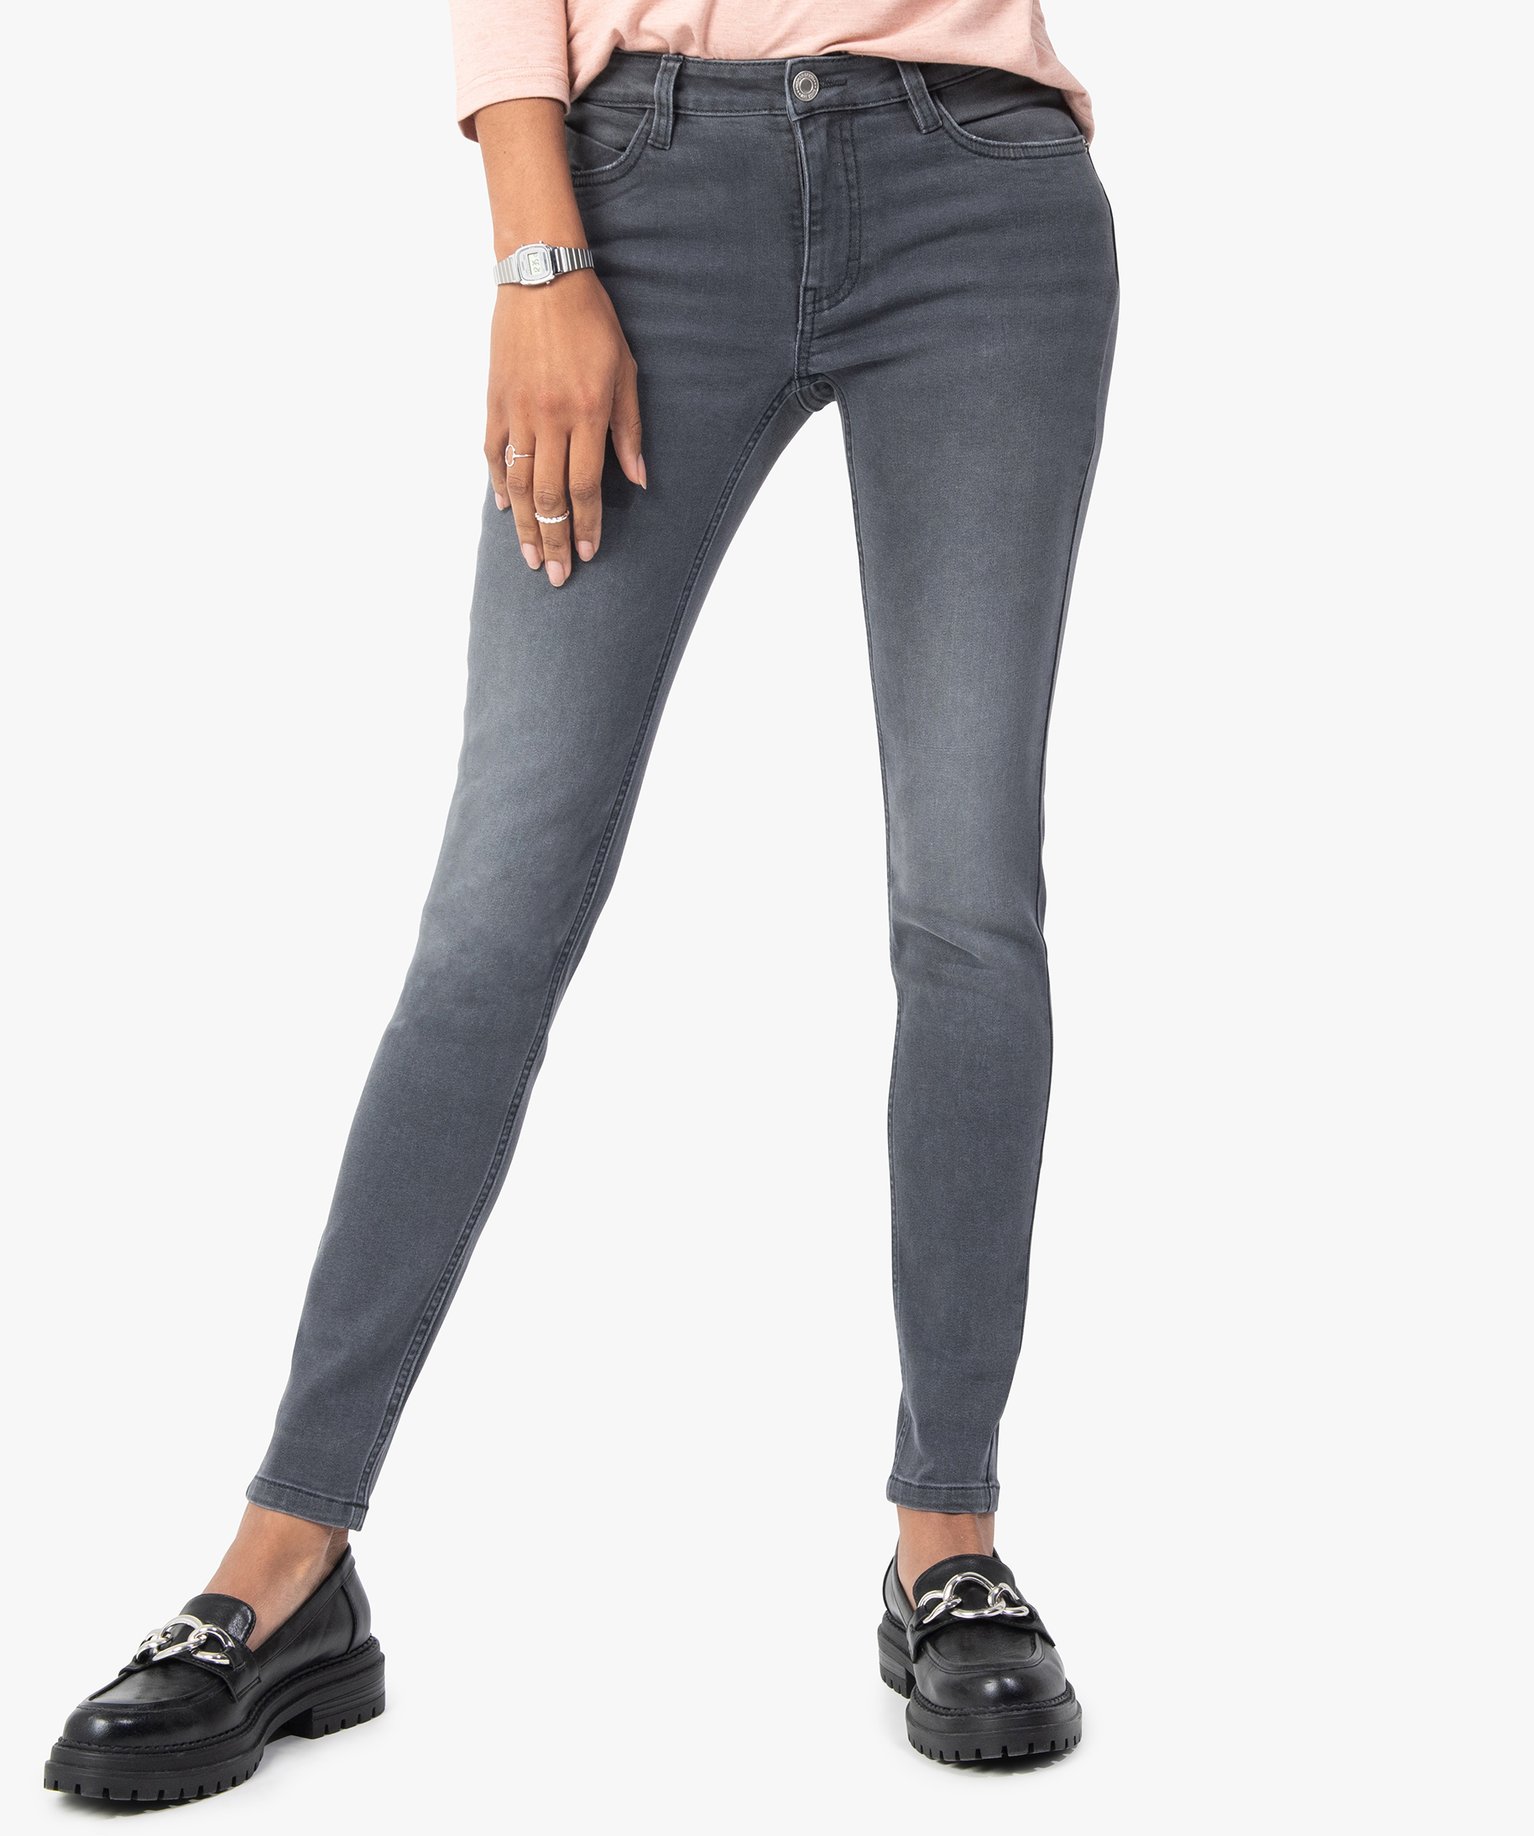 jean skinny taille normale delave femme gris